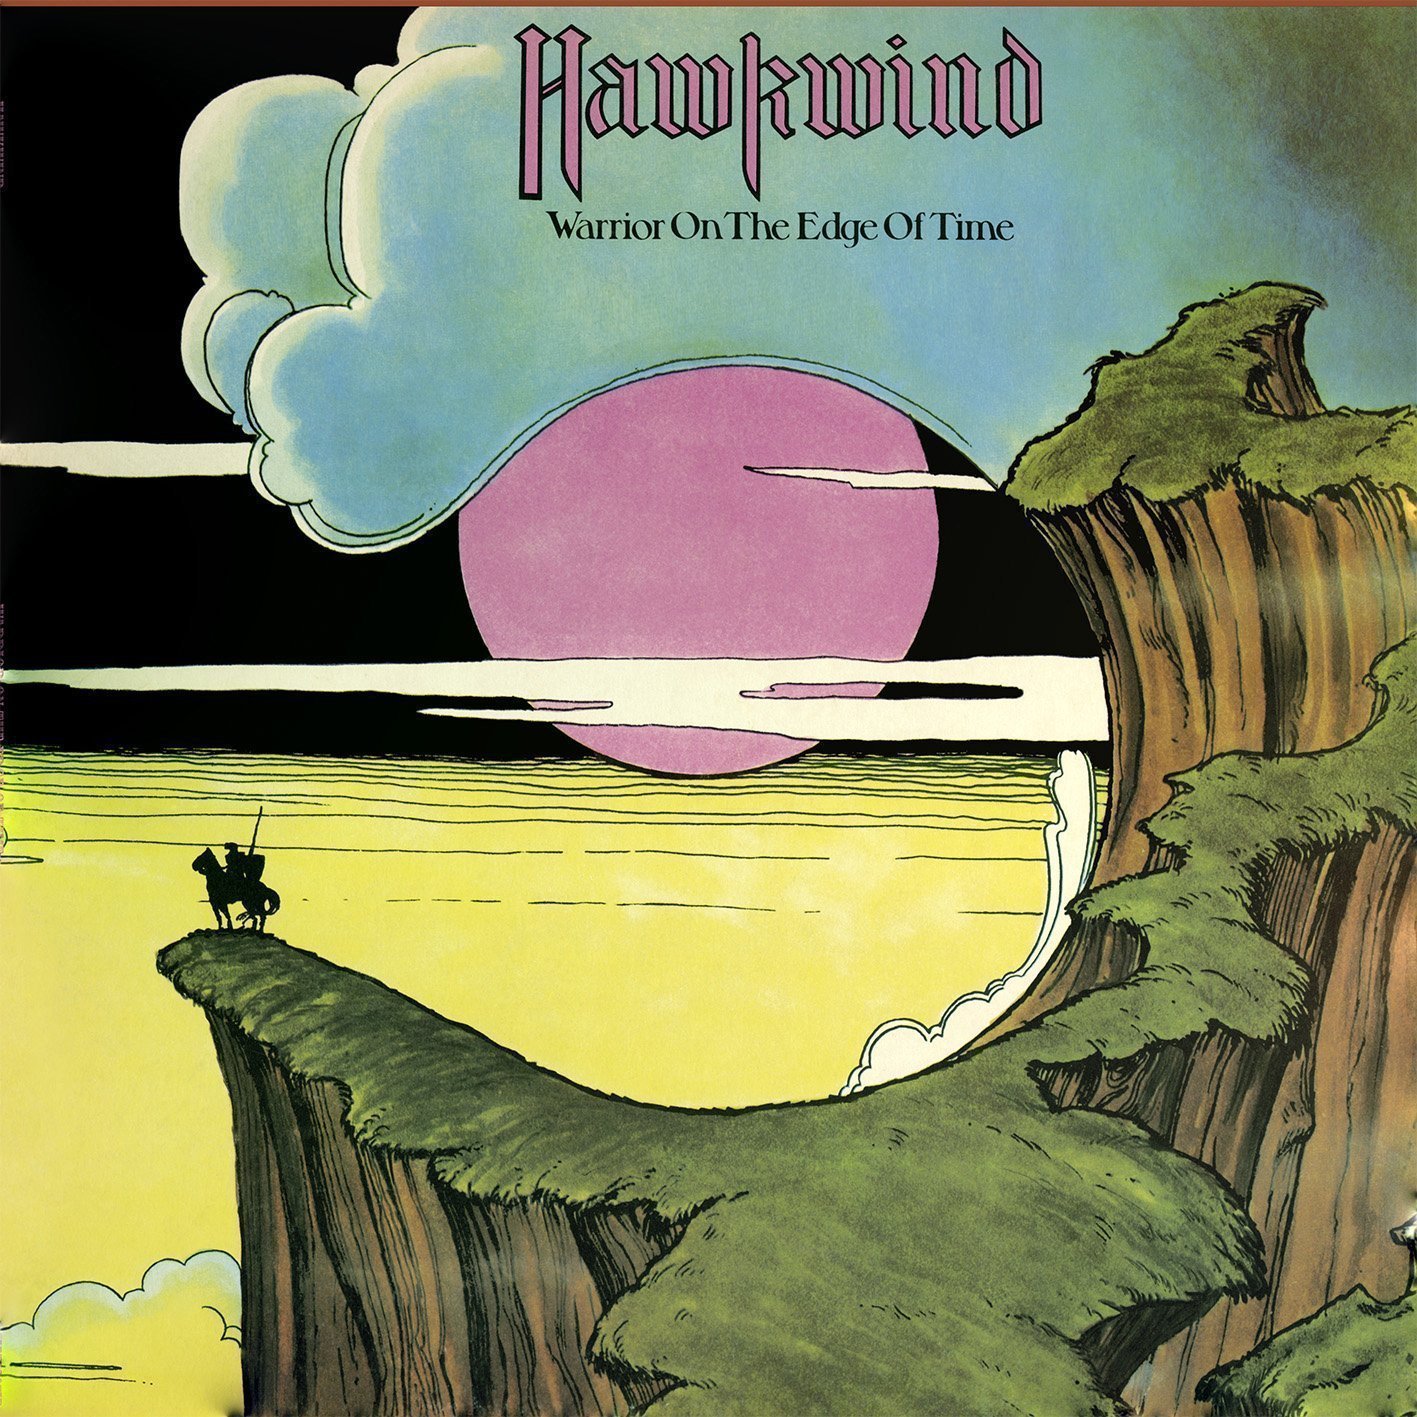 LP Hawkwind - Warrior On The Edge Of Time (LP)